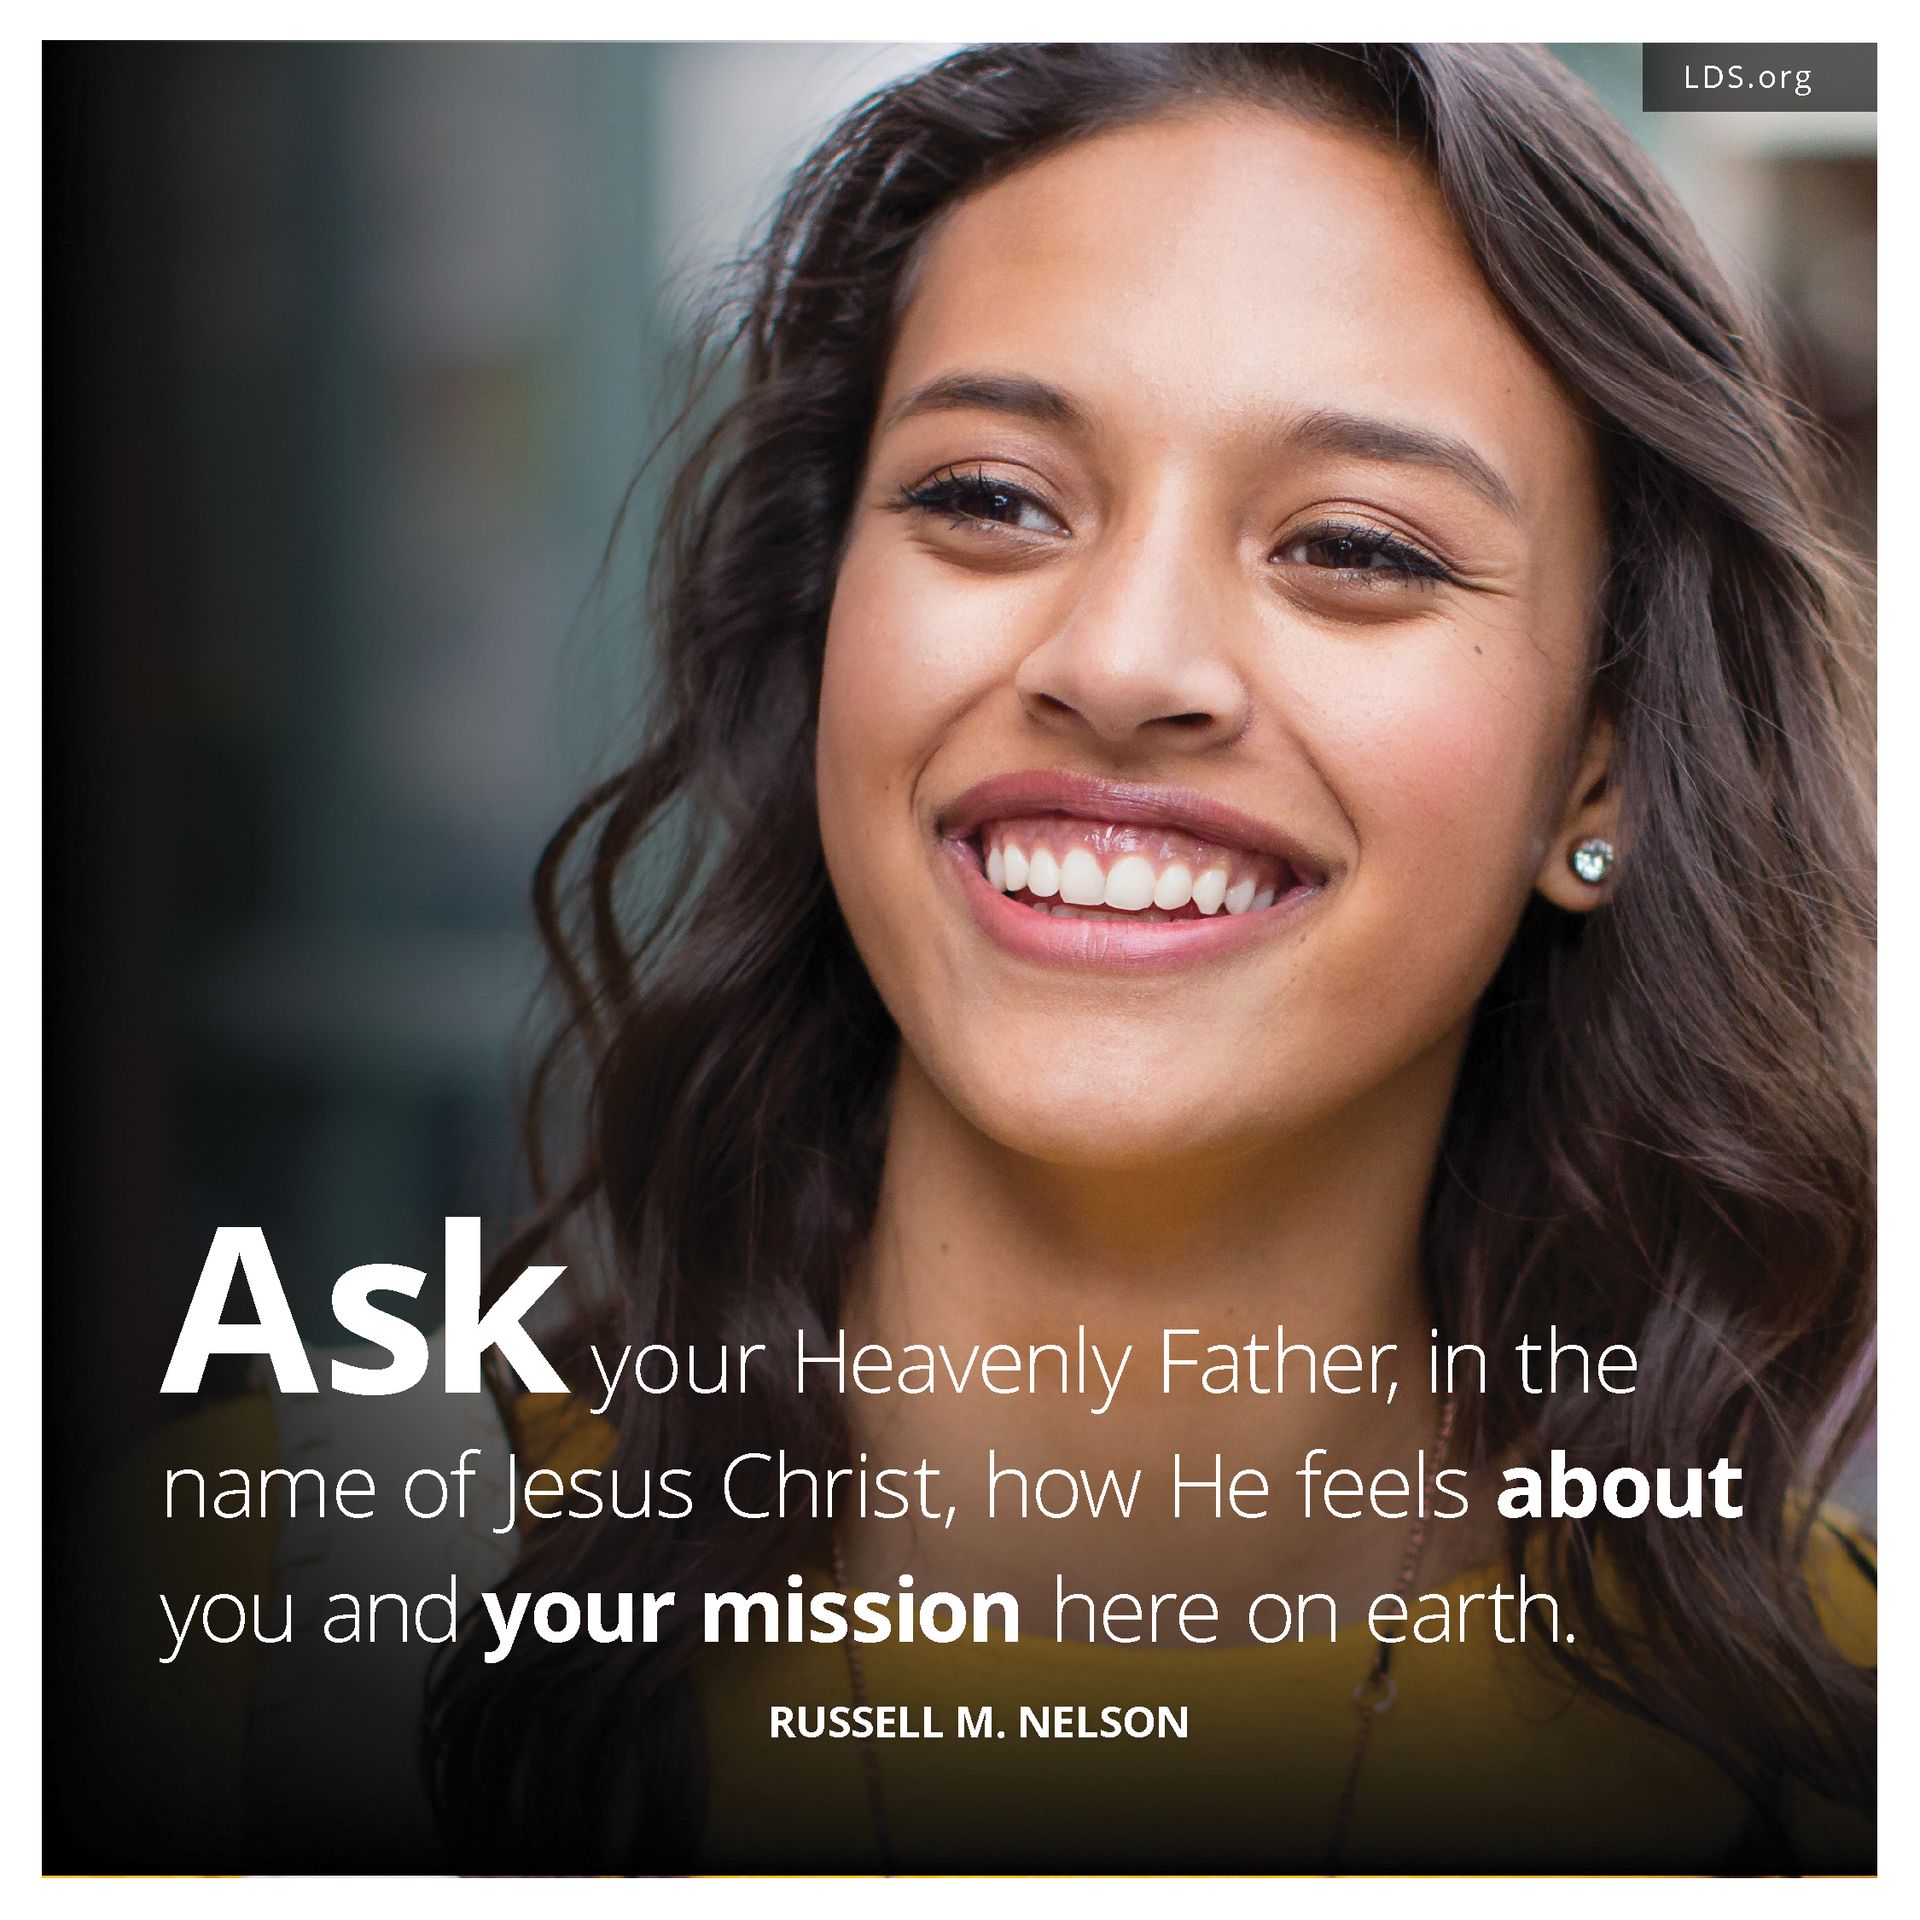 “Ask your Heavenly Father, in the name of Jesus Christ, how He feels about you and your mission here on earth.” —President Russell M. Nelson, “Becoming True Millennials”